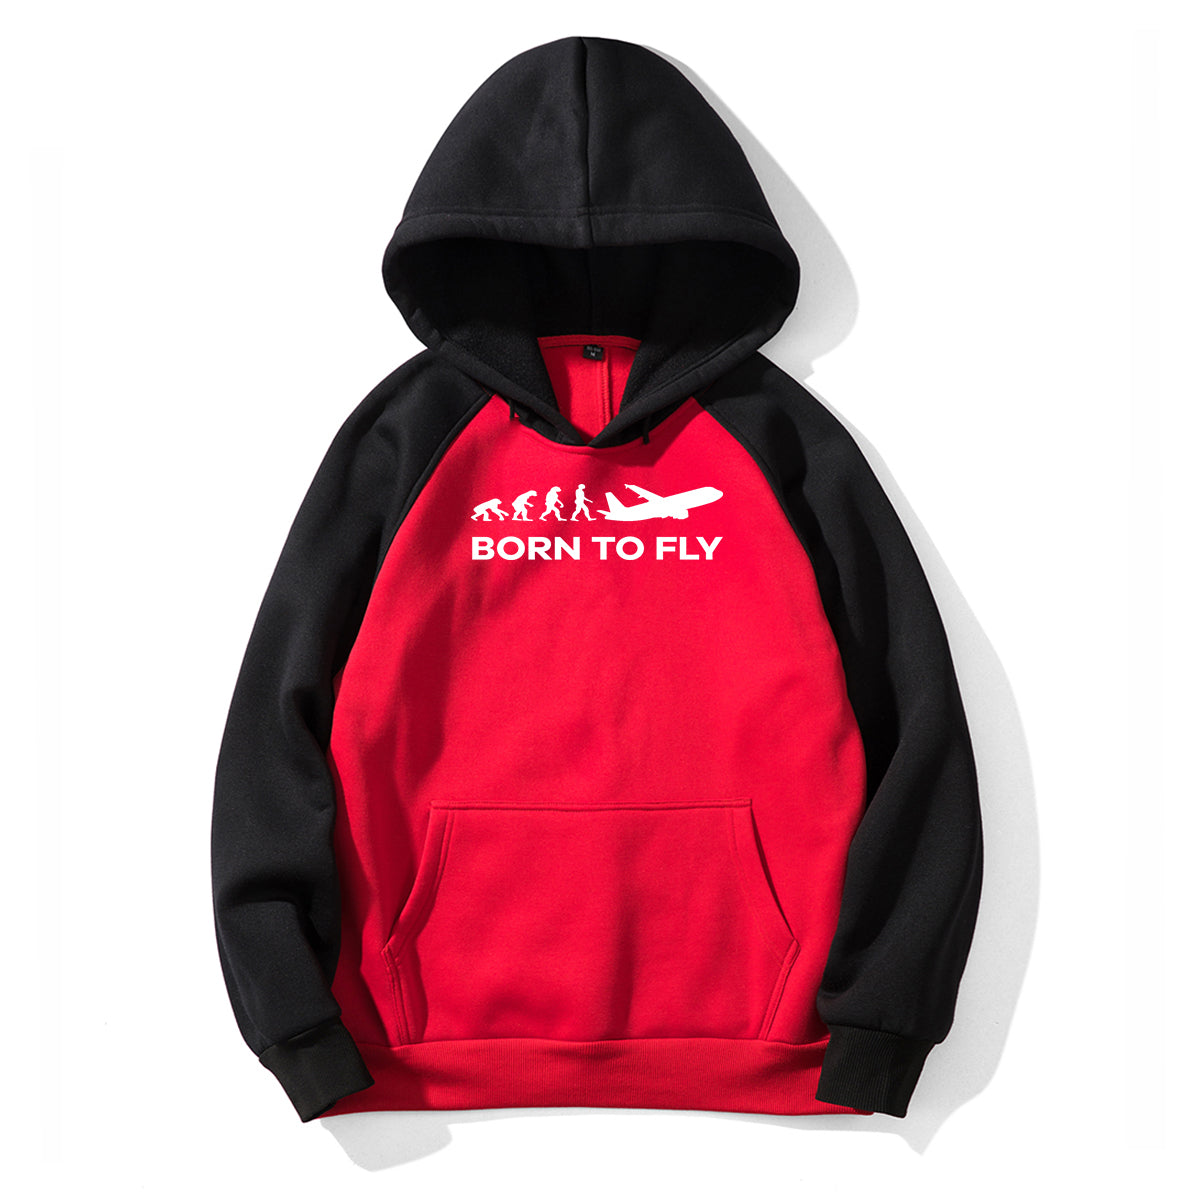 Born To Fly Designed Colourful Hoodies